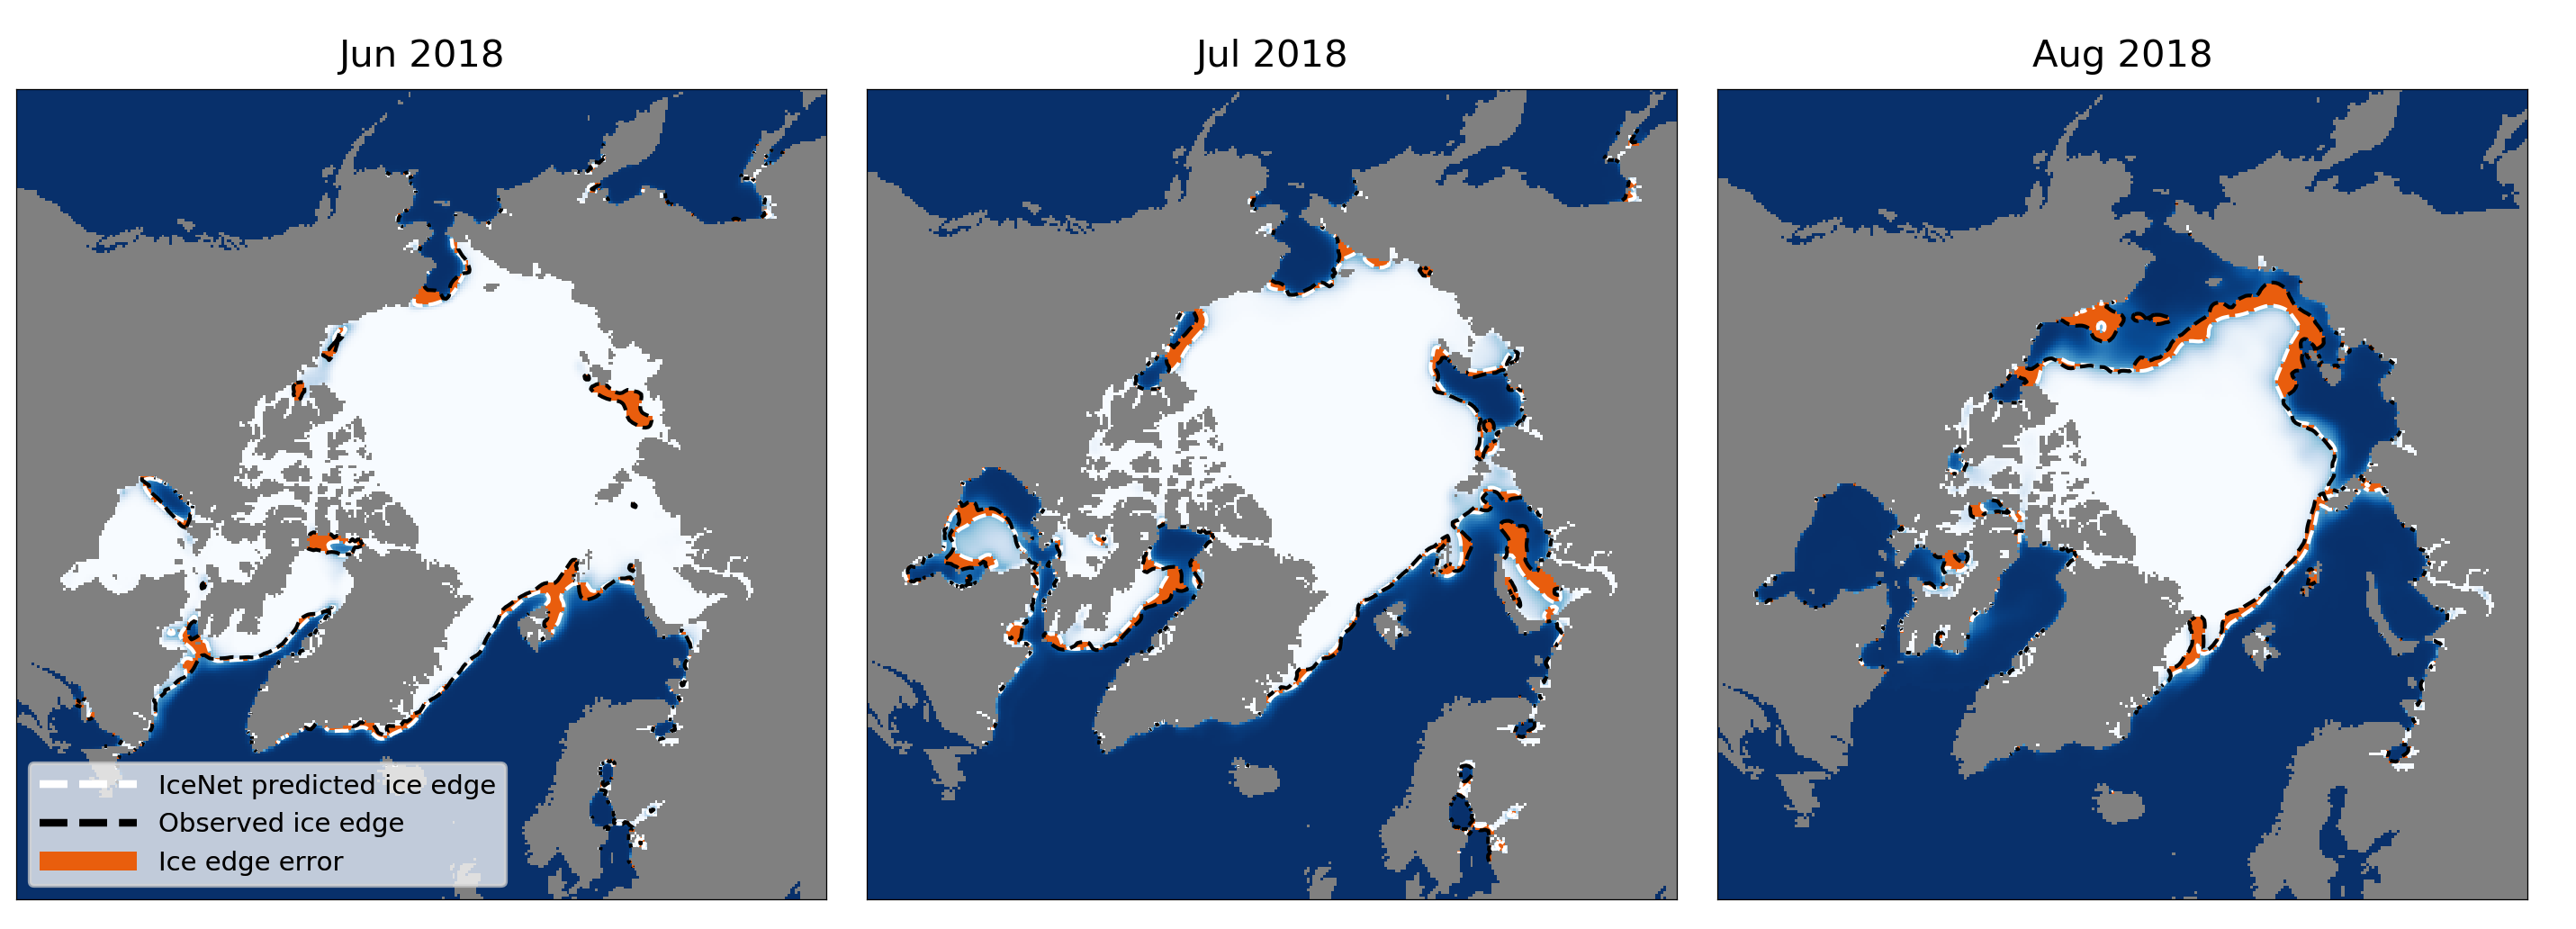 Heatmaps showing IceNet's 1-month-ahead forecasts for the probability of Arctic sea ice over the 2018 melting season (June to August). Overlaid are the predicted and true ice edges, and the error between them